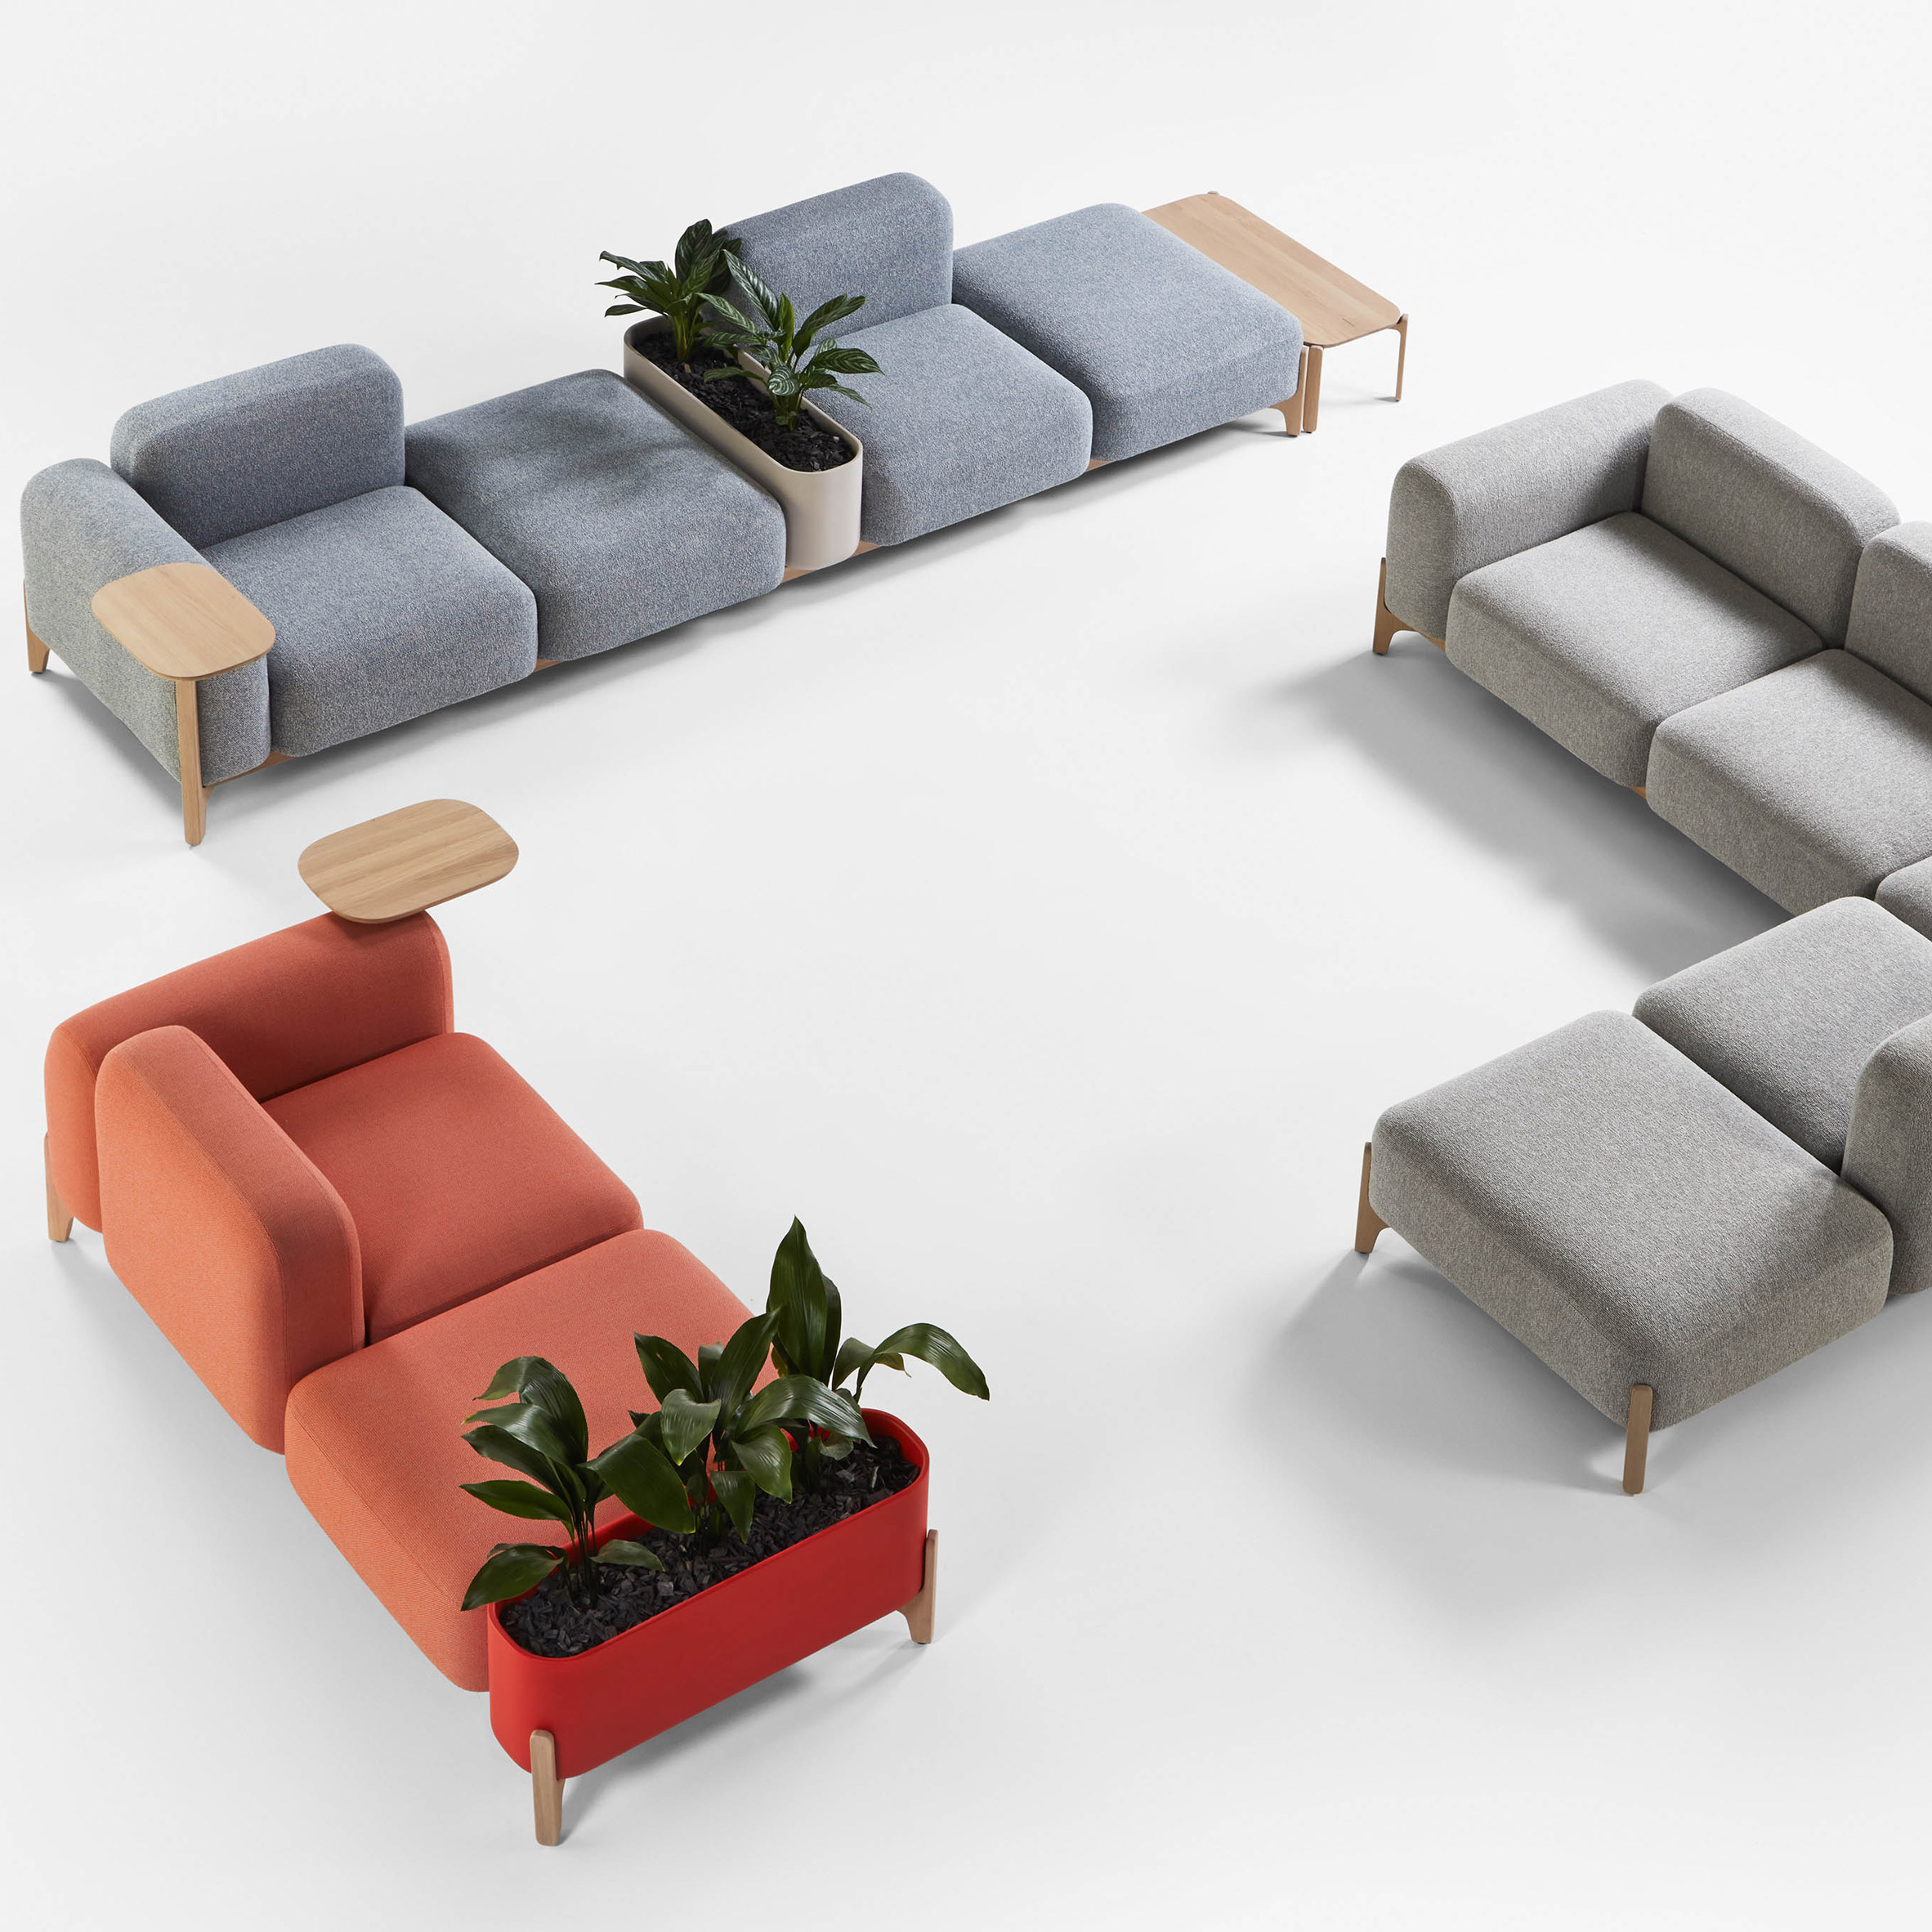 Prostoria's sofas by Benjamin Hubert "tackle hybrid living and work"